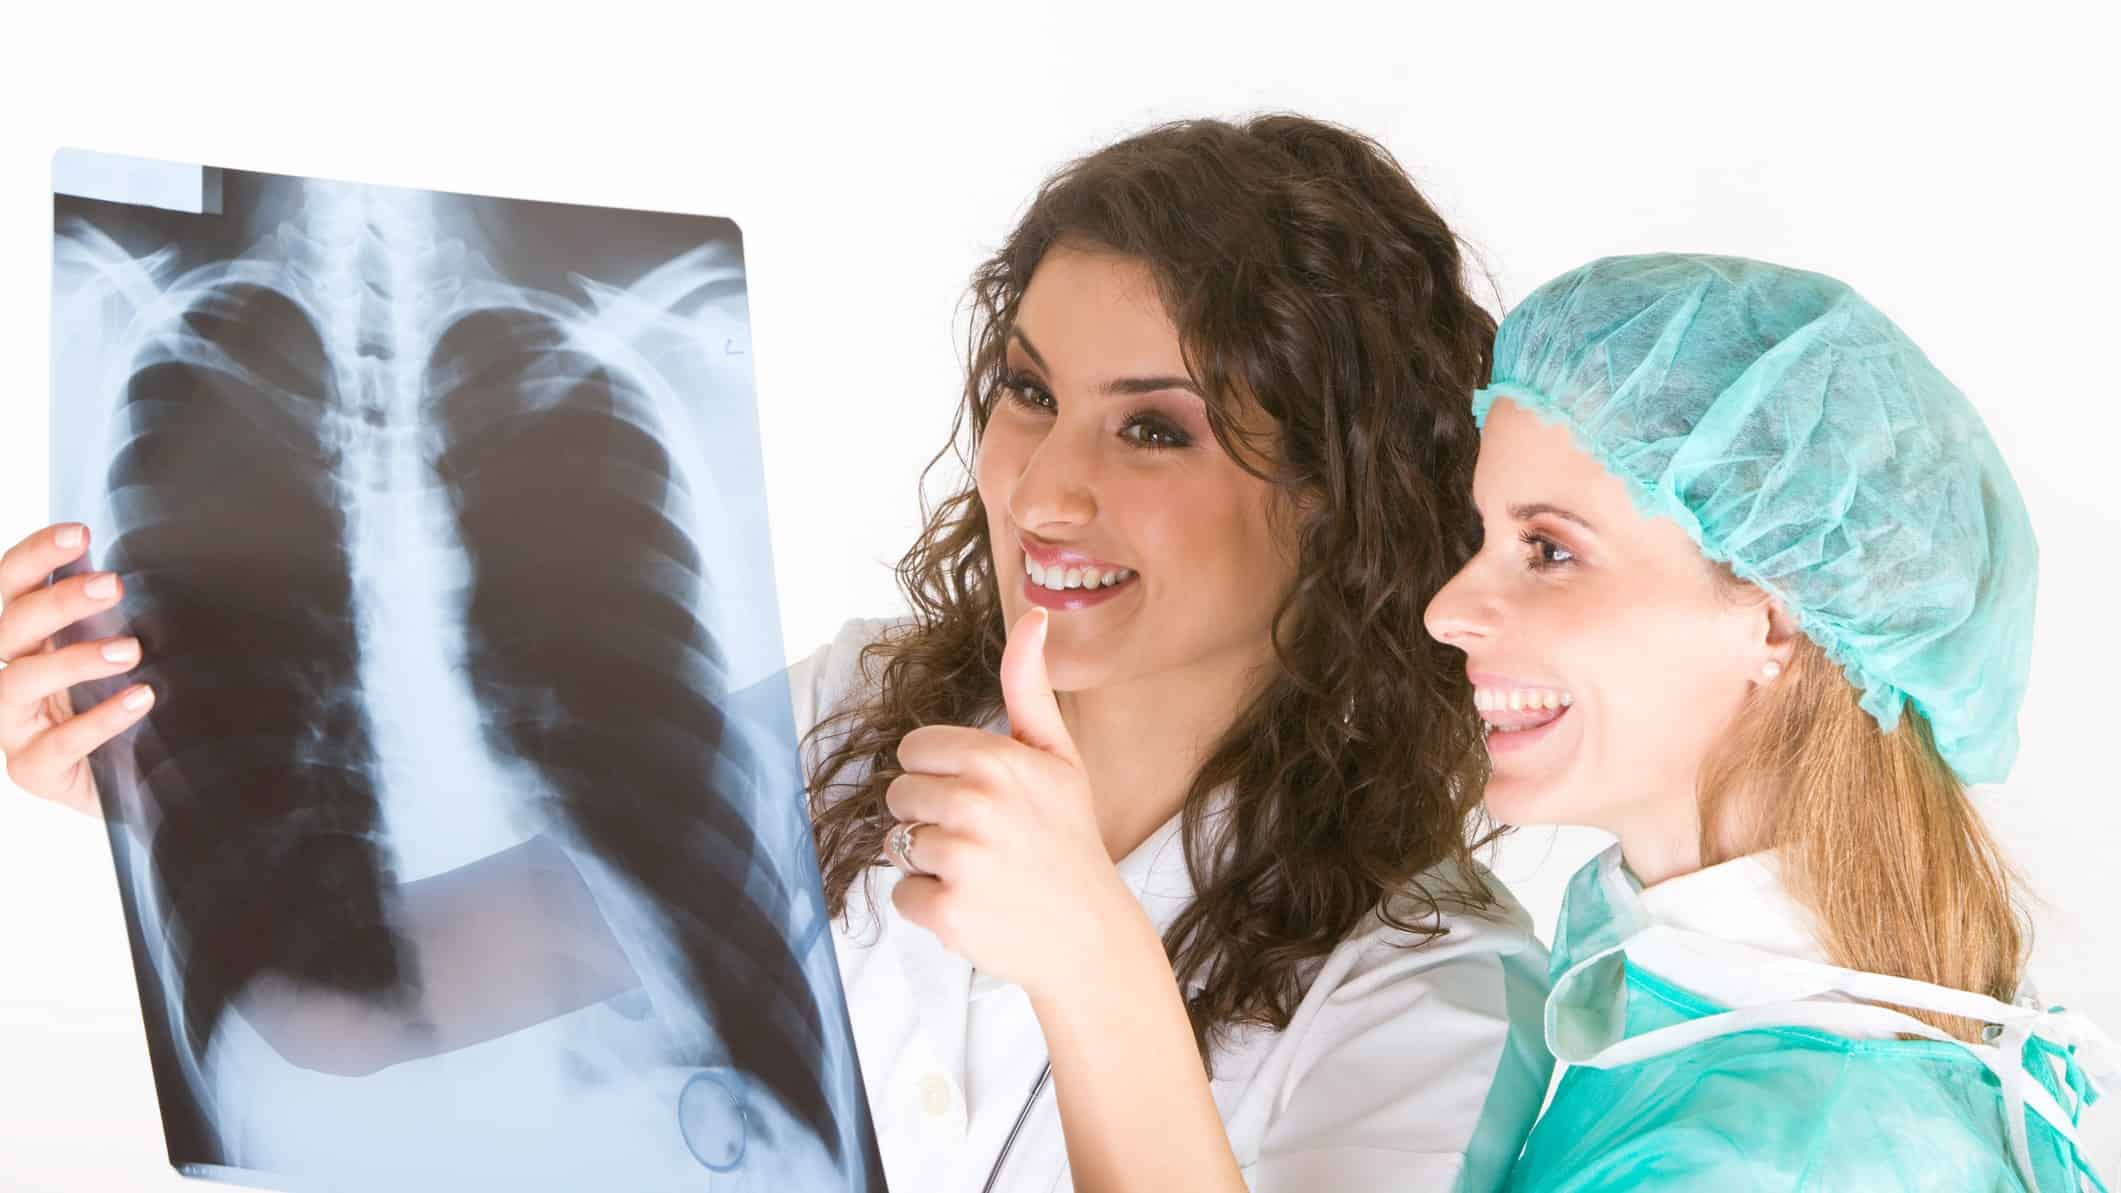 two women, one in a white coat and the other in medical protective gear including a hair cover, mask around her neck and a gown, look happily at an X-ray of a person's chest with one giving the thumbs up sign.